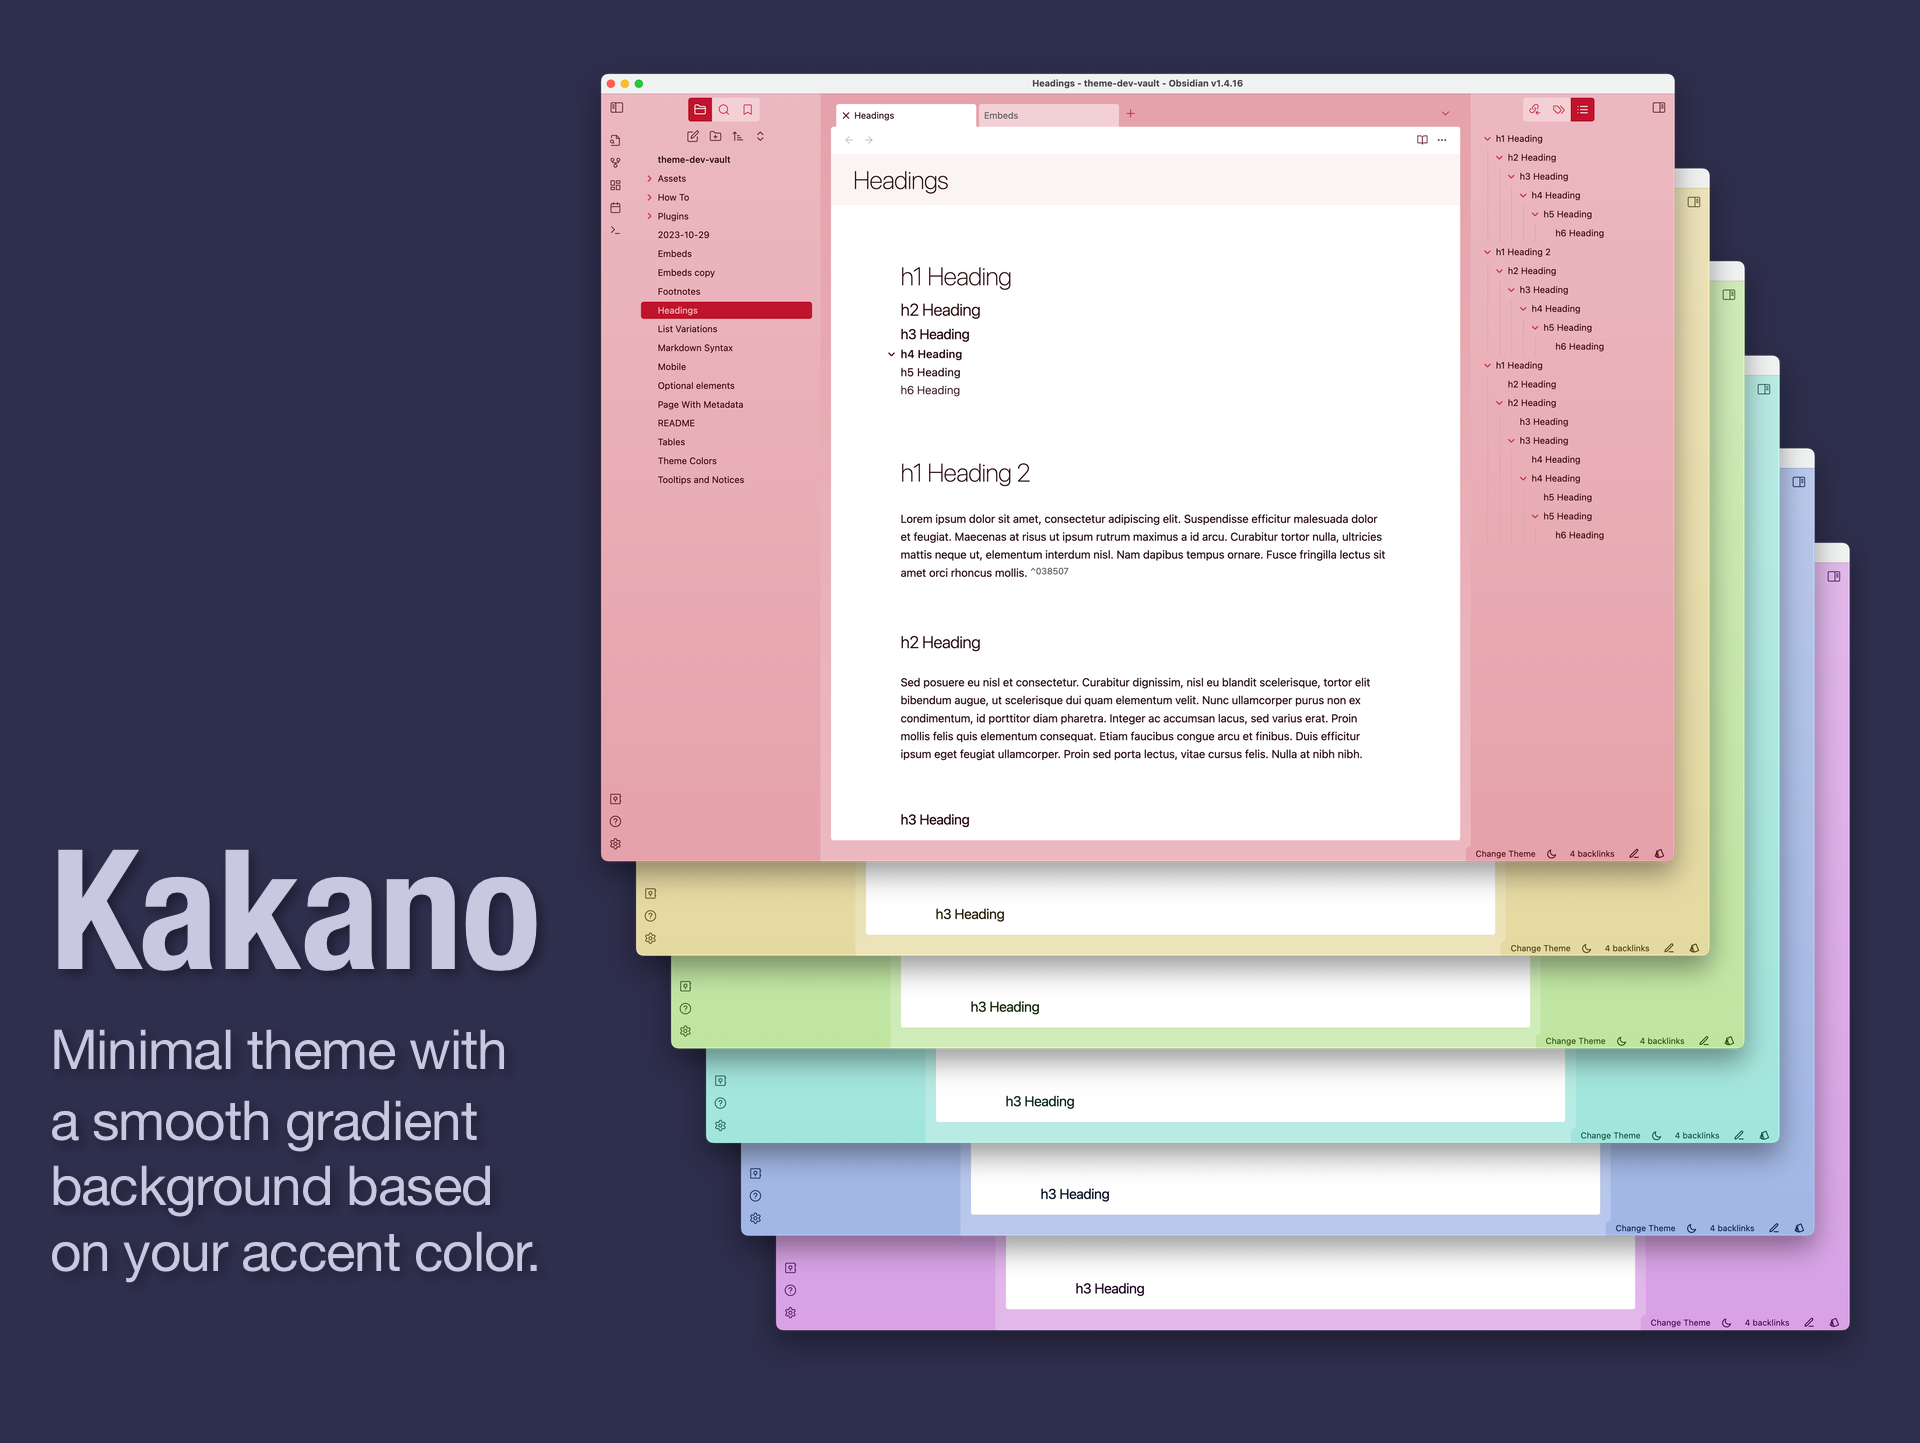 Minimal theme with a smooth gradient background based on your accent color. Image shows six screenshots with differently-colored backgrounds.